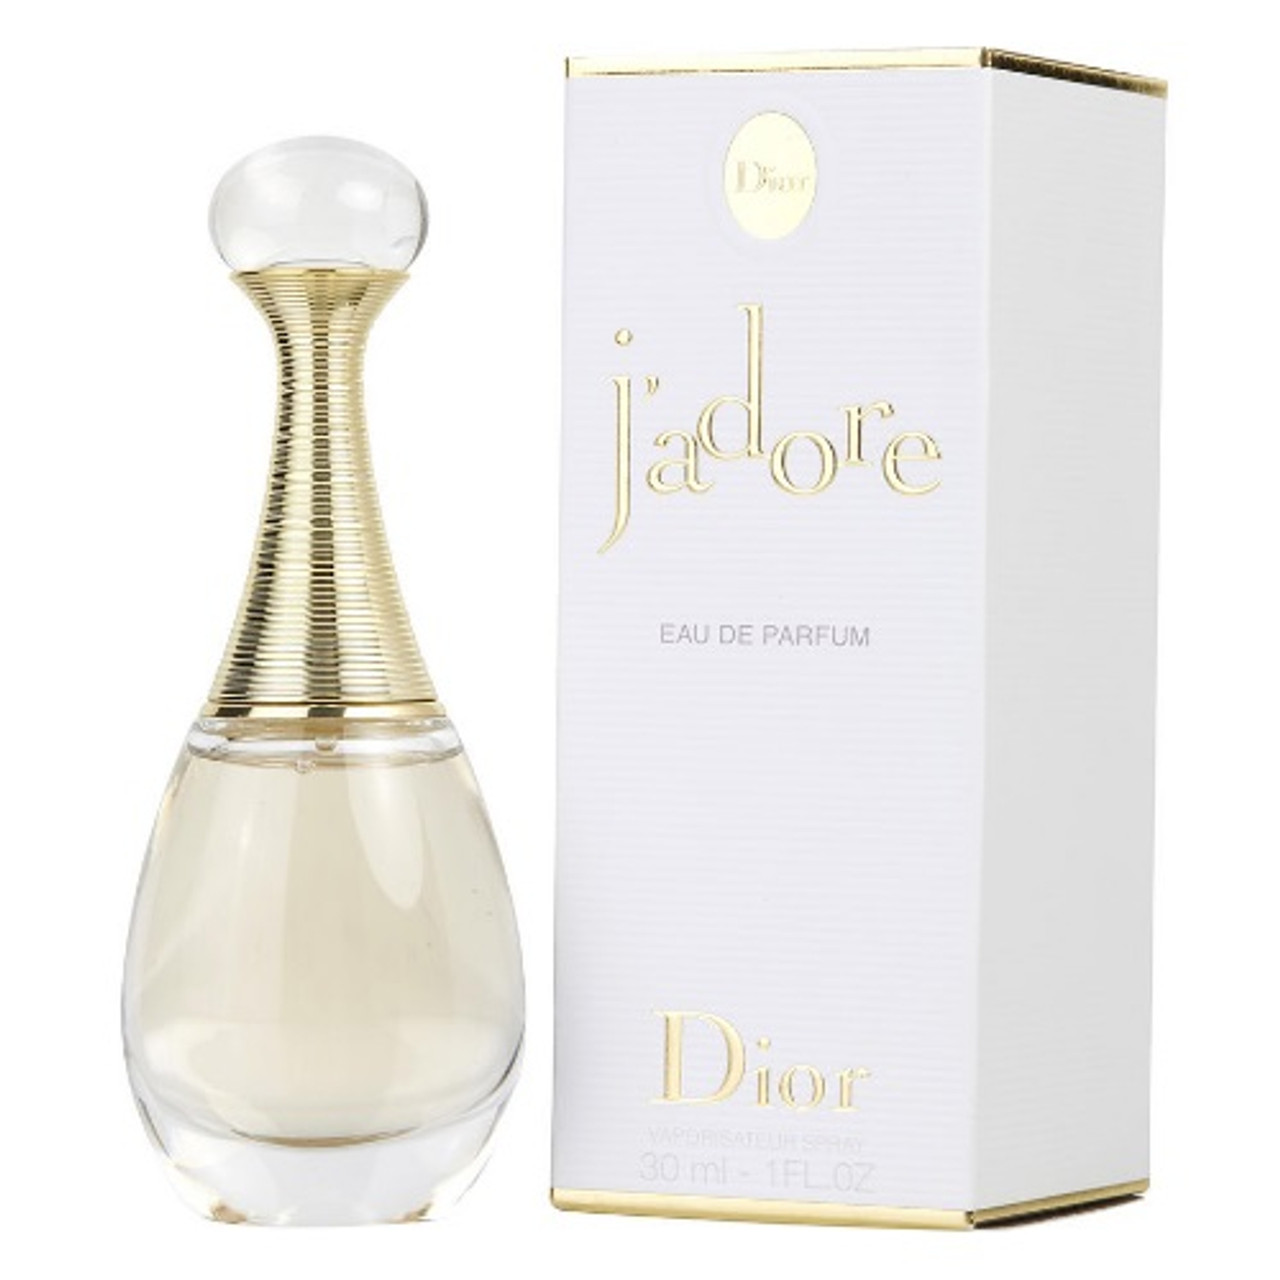 6 Timeless Dior J'Adore Perfumes For Her